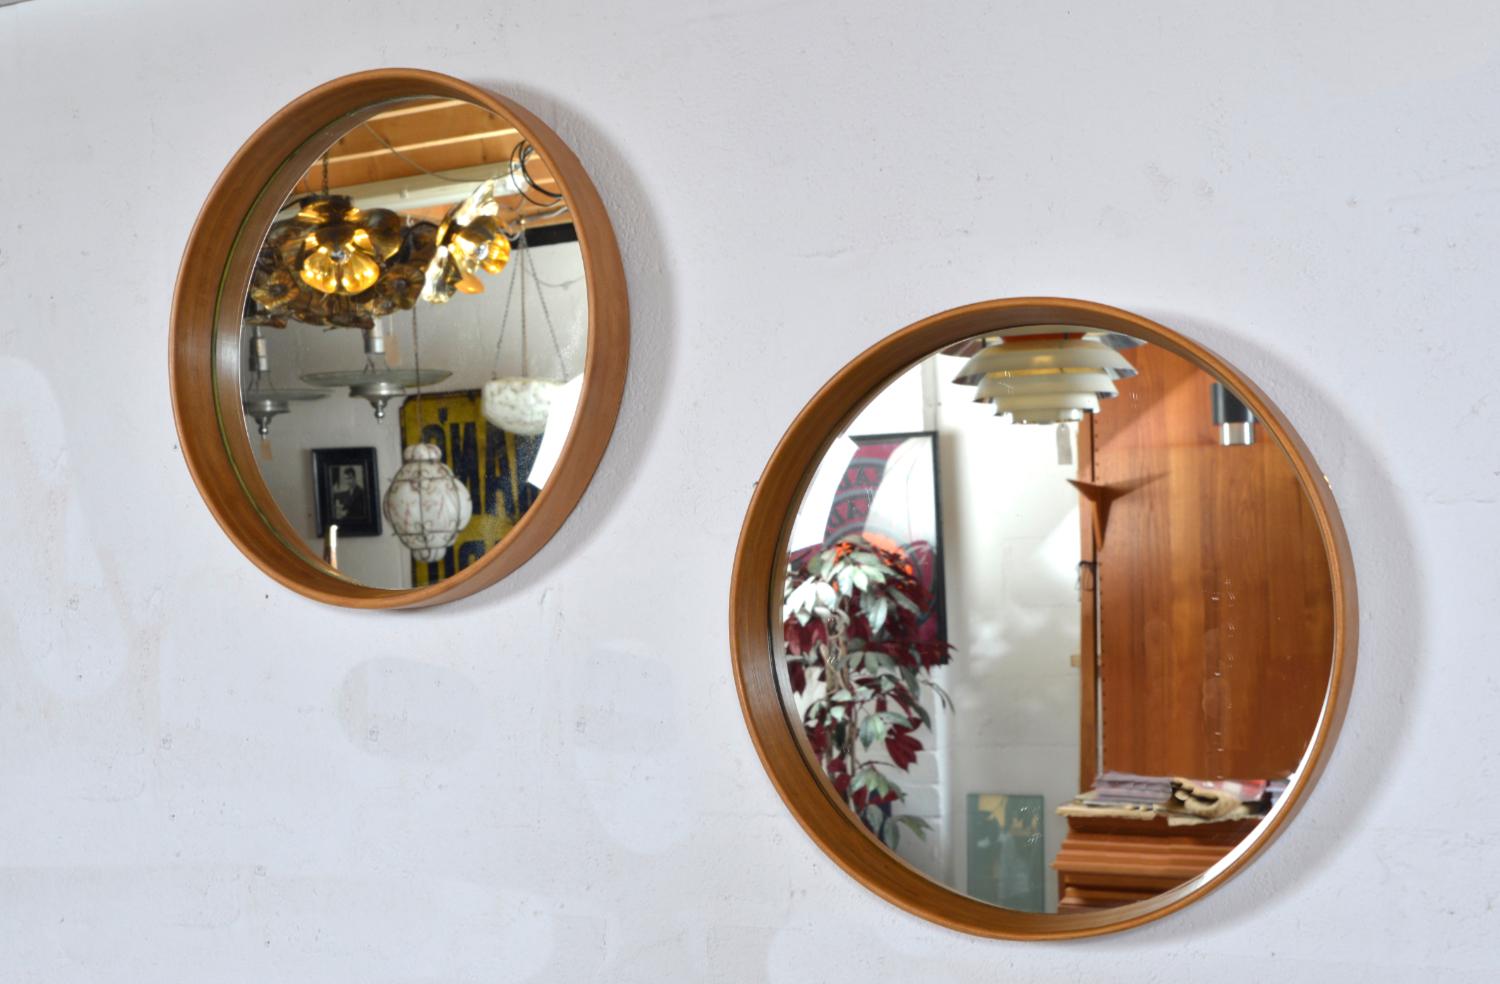 A very stylish, matching pair of 1960s Swedish 'tray' wall mirrors in a lovely honey-coloured bentwood beech - typically Scandinavian, with clean lines and stylish simple design. The glass mirrors are clean and clear, and the beech frames heavy and